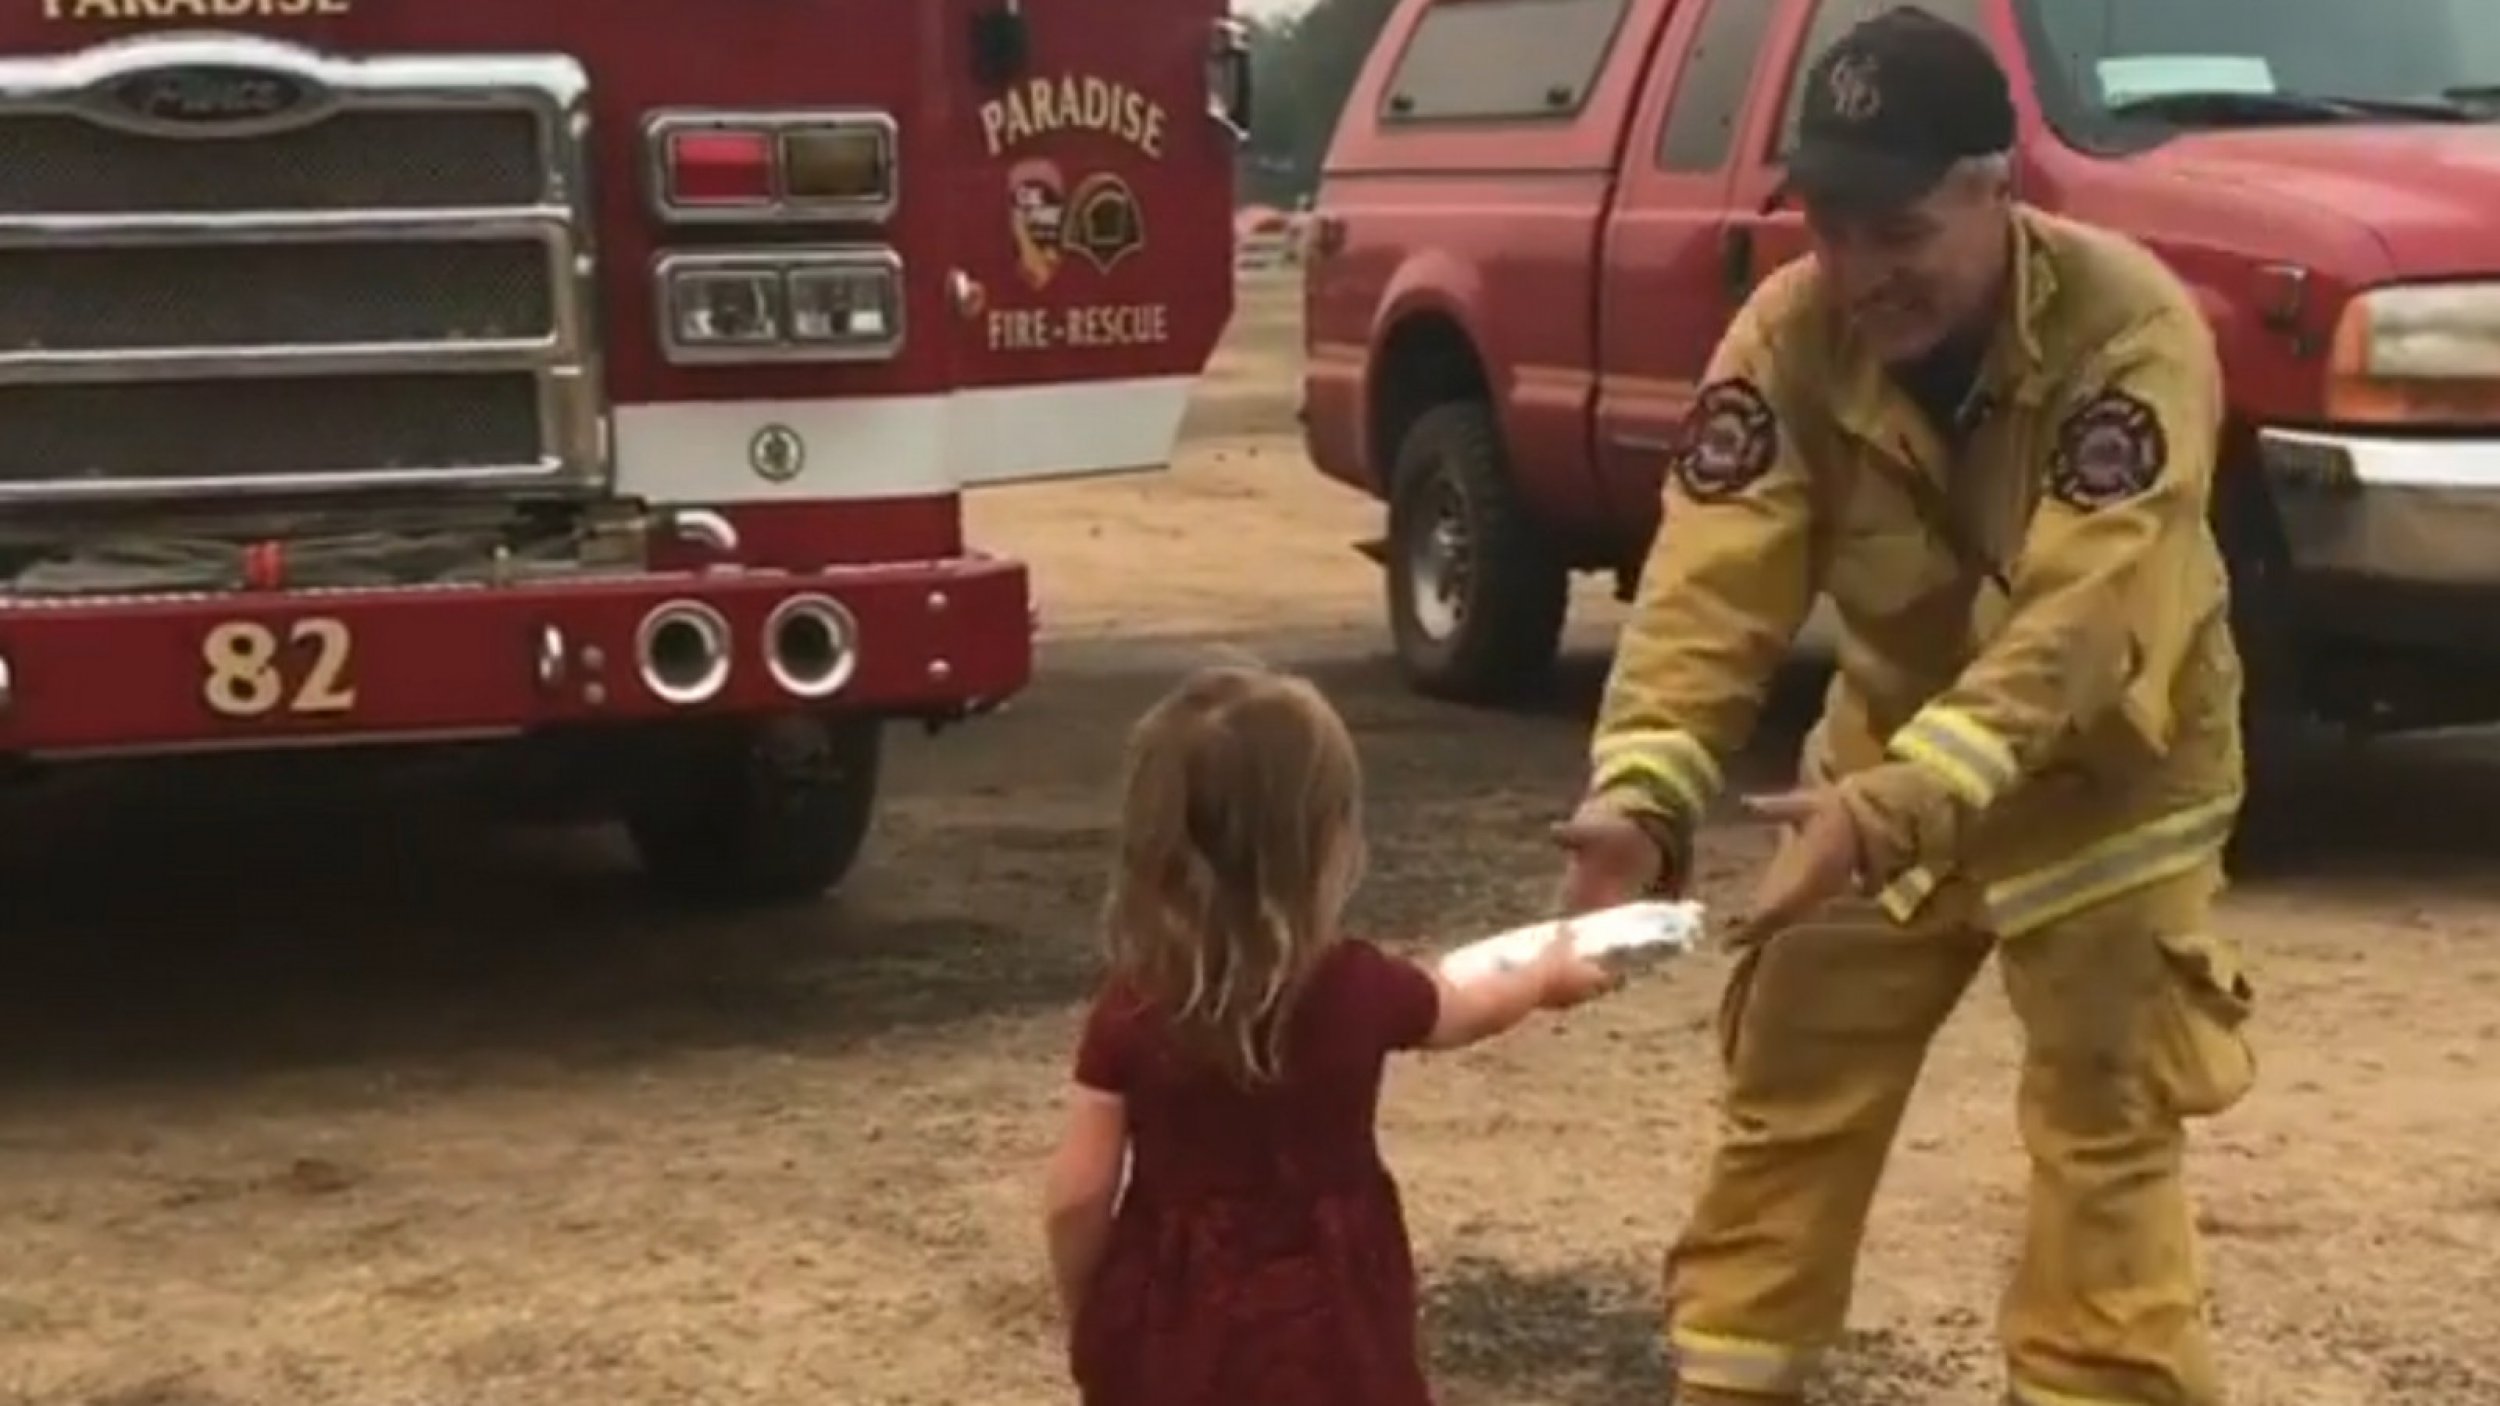 Adorable Toddler Gives Breakfast To California Firefighters Battling Carr Fire